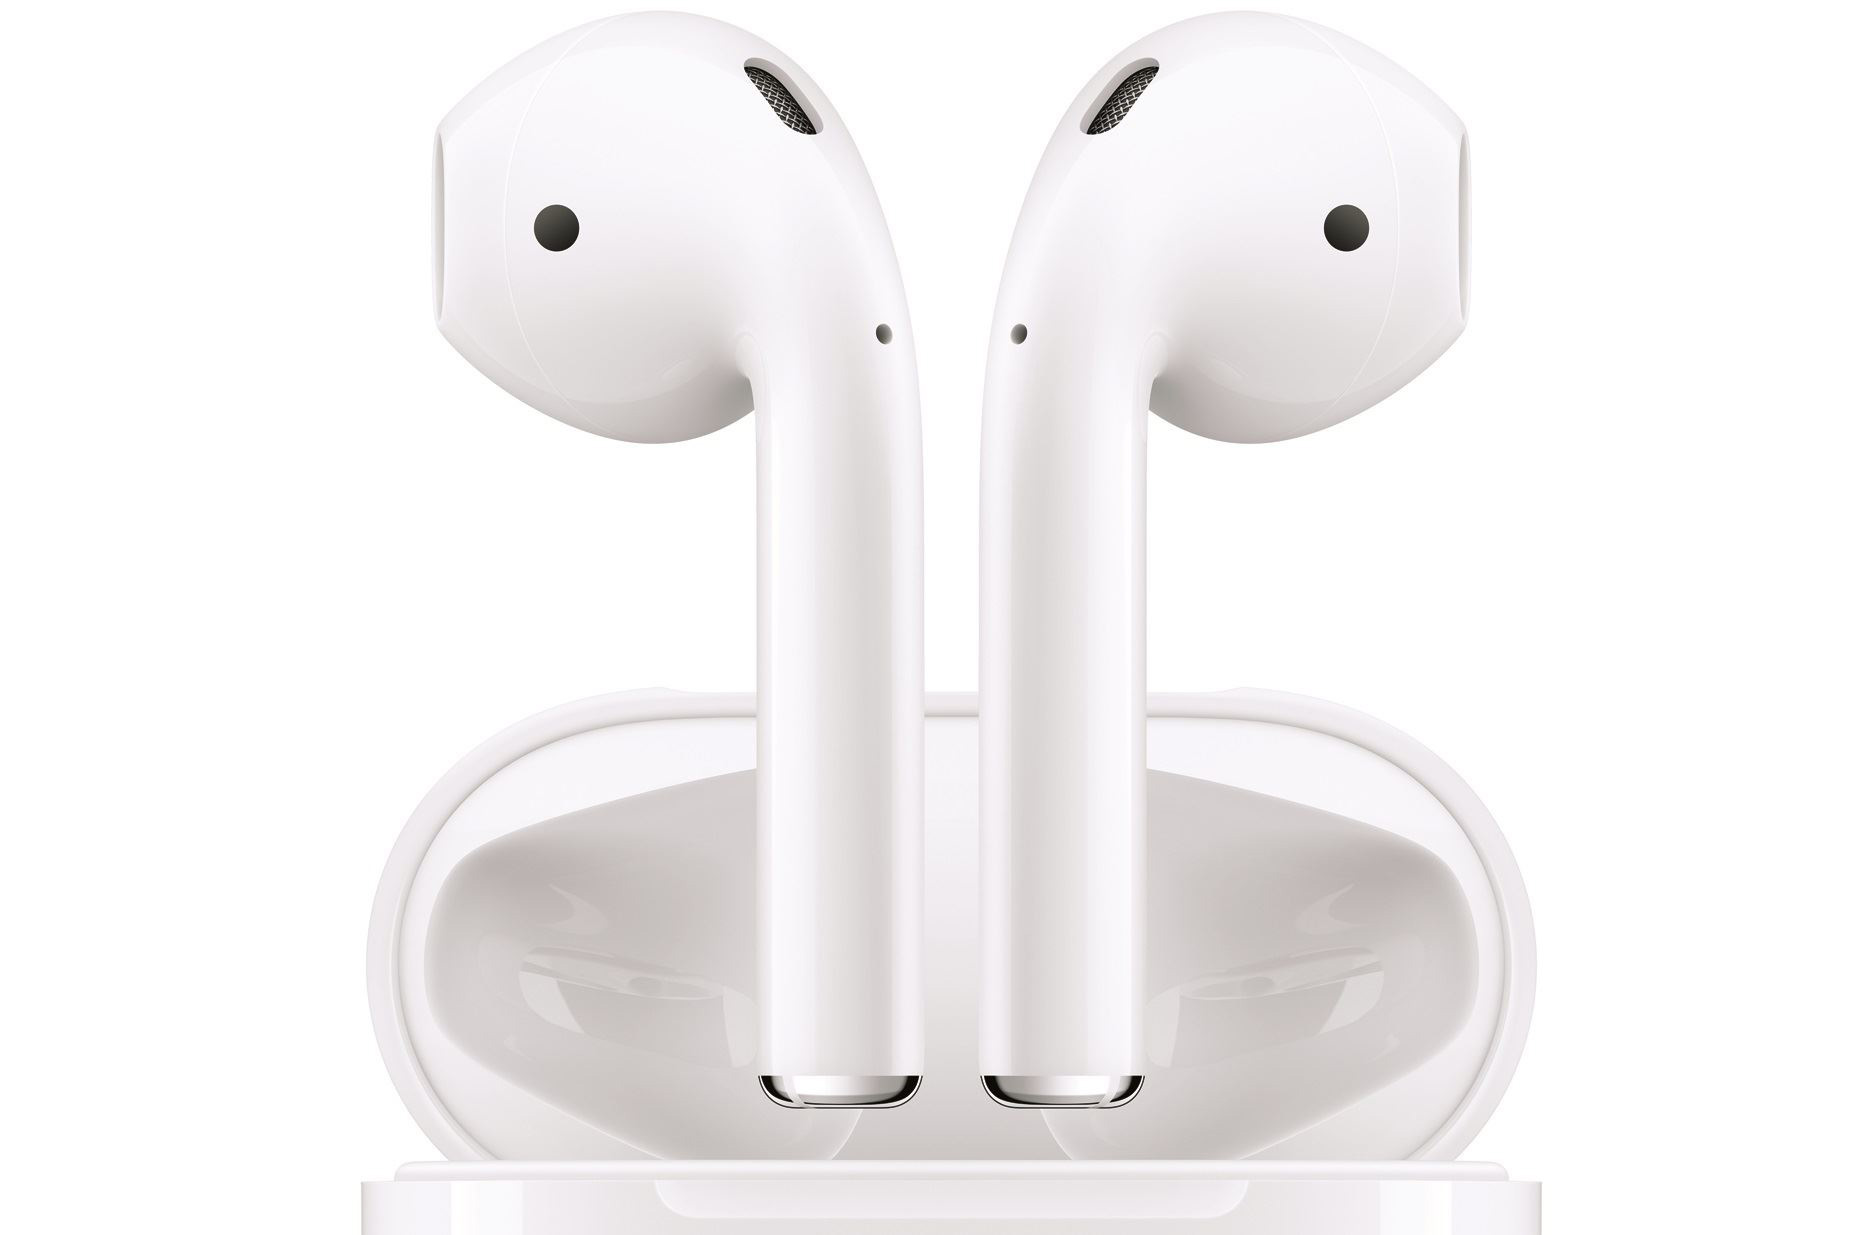 Apple finally starts shipping AirPods